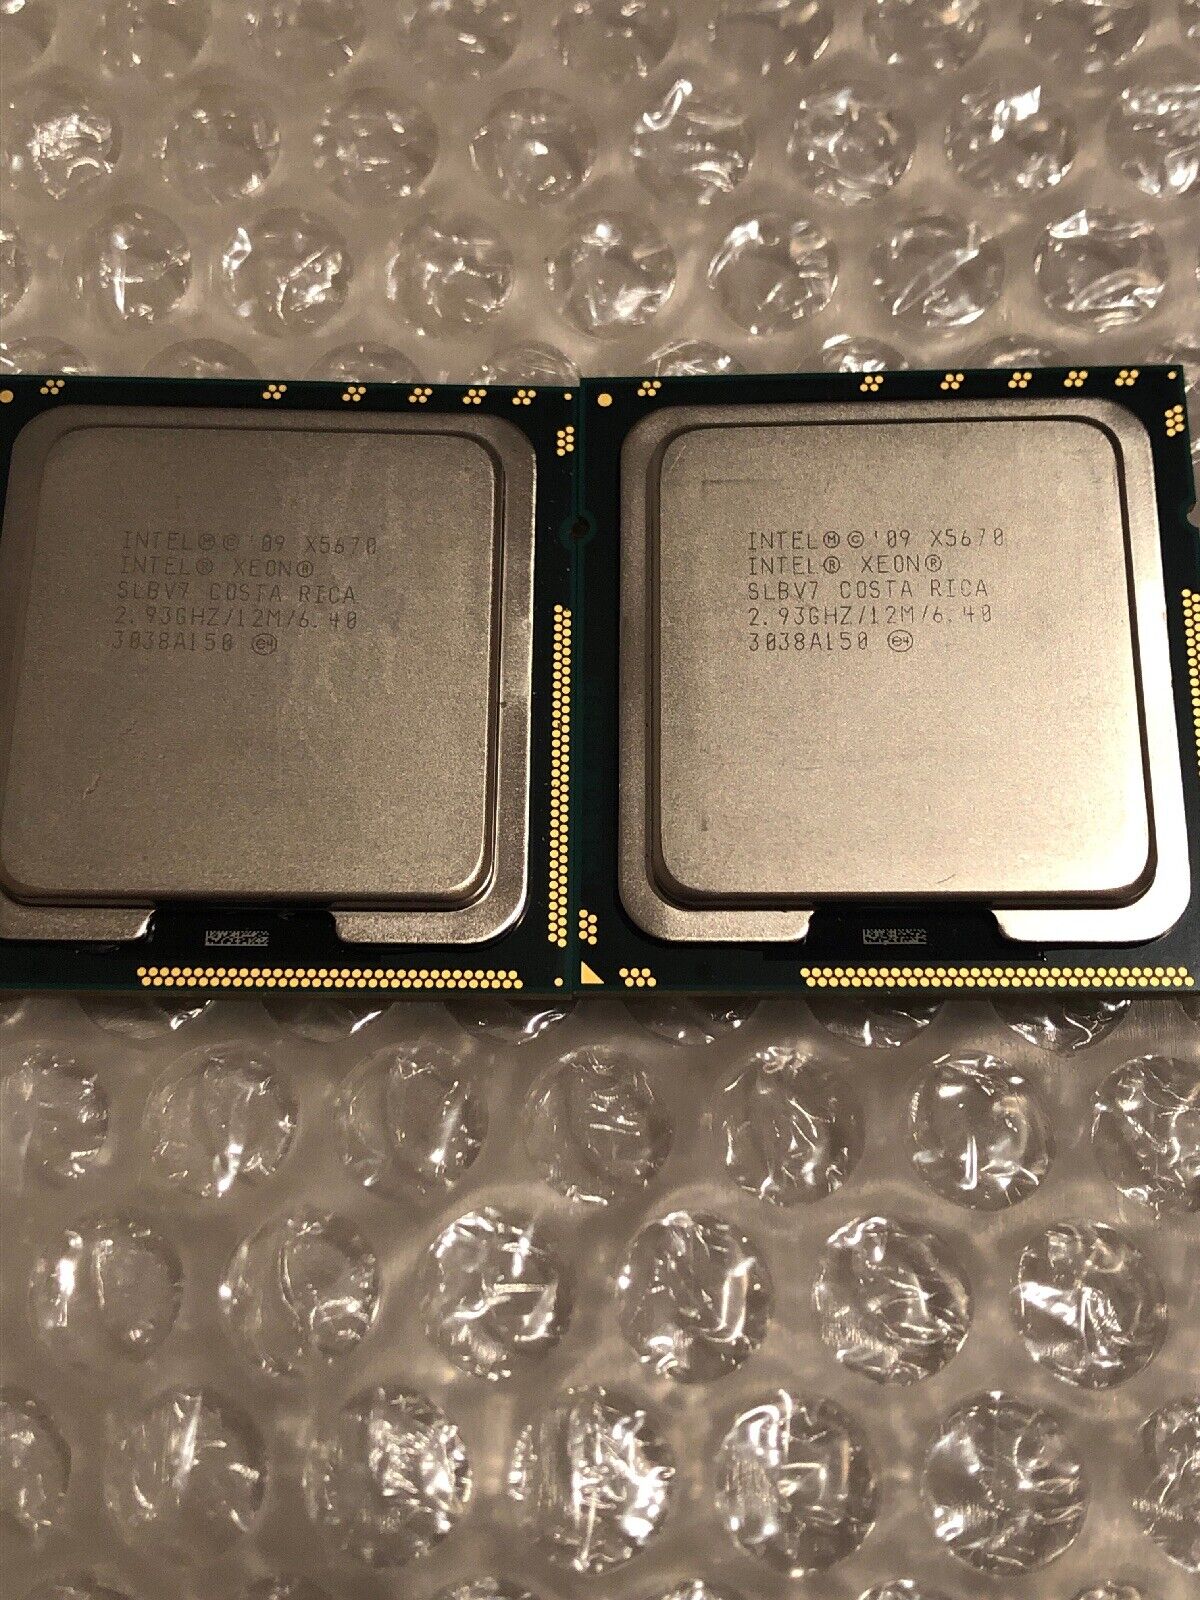 Pair of Intel SLBV7 X5670 2.93GHz 6 Core Processors  Intel Does Not Apply